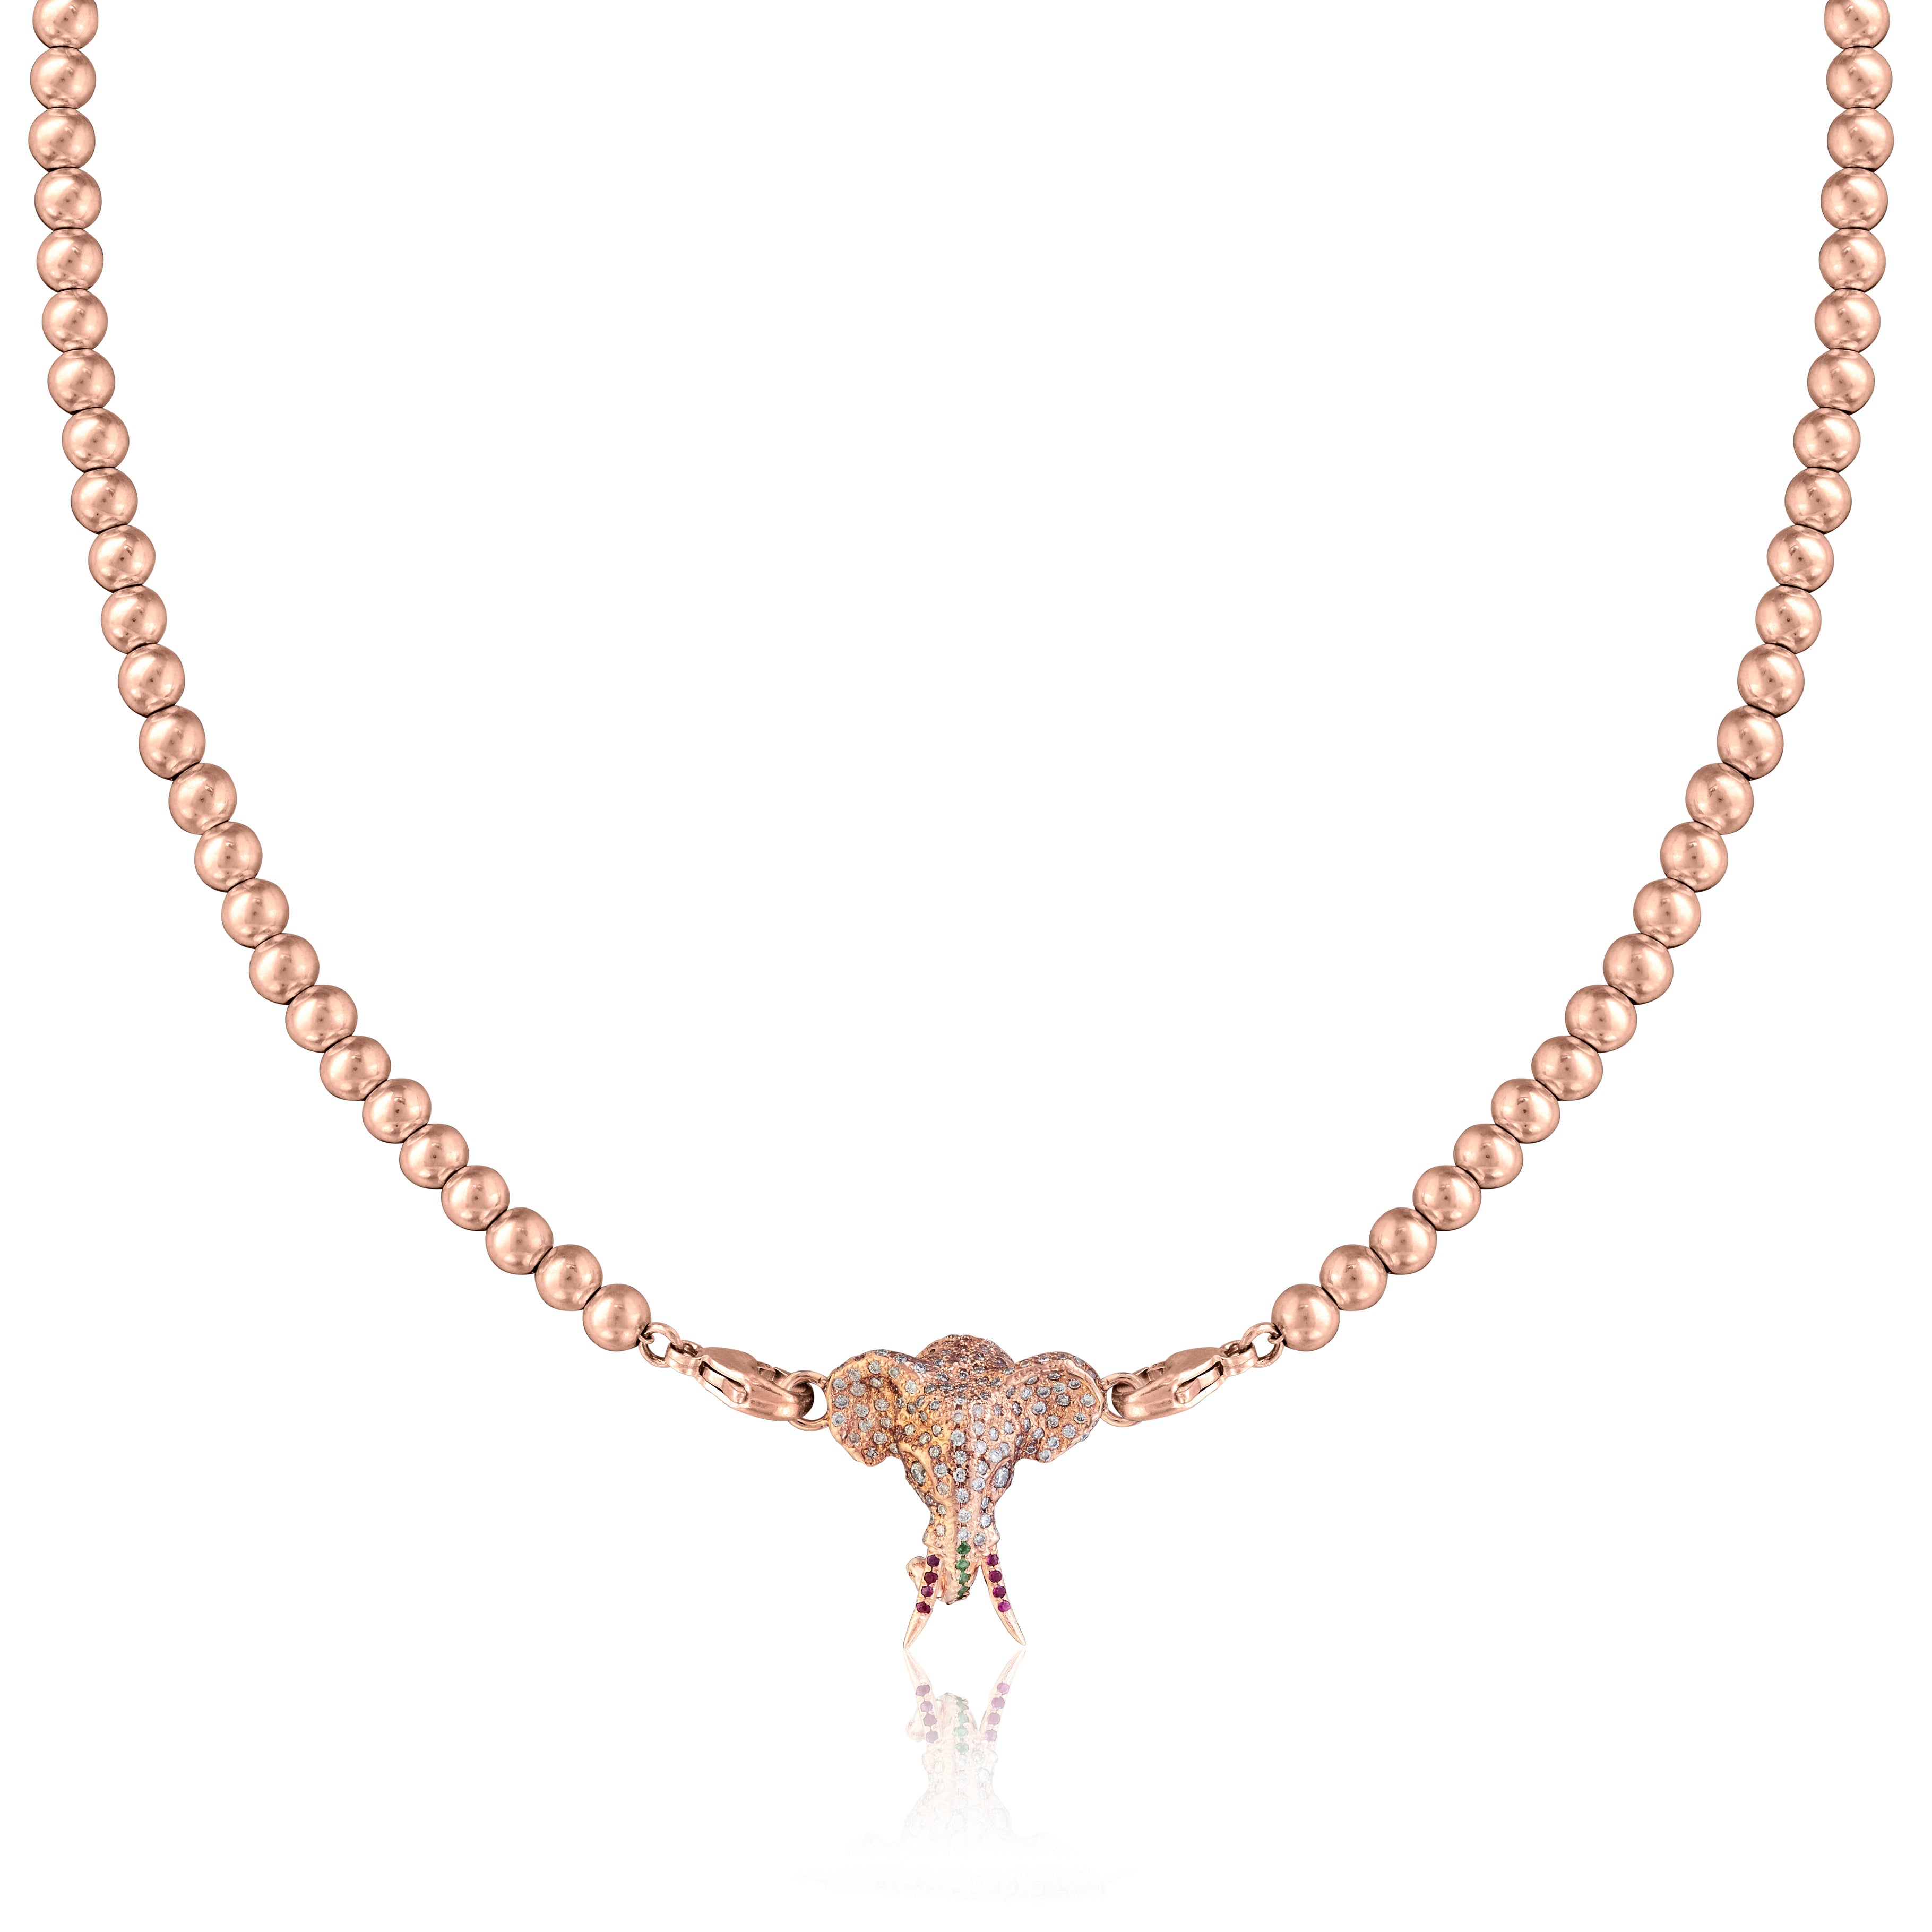 18ct Rose gold bead necklace